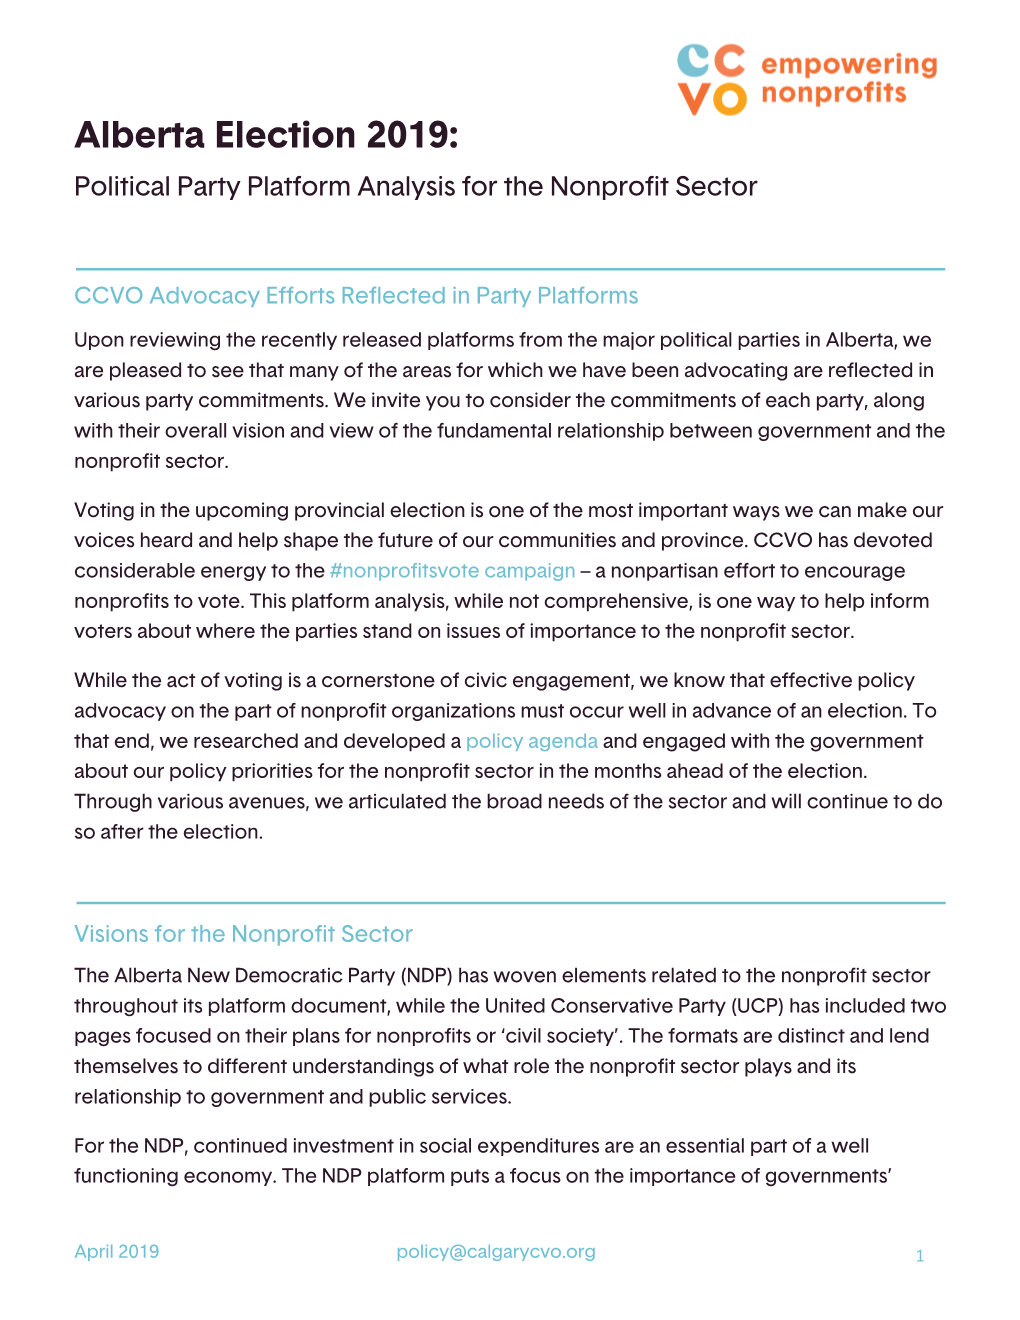 Political Party Platform Analysis for the Nonprofit Sector